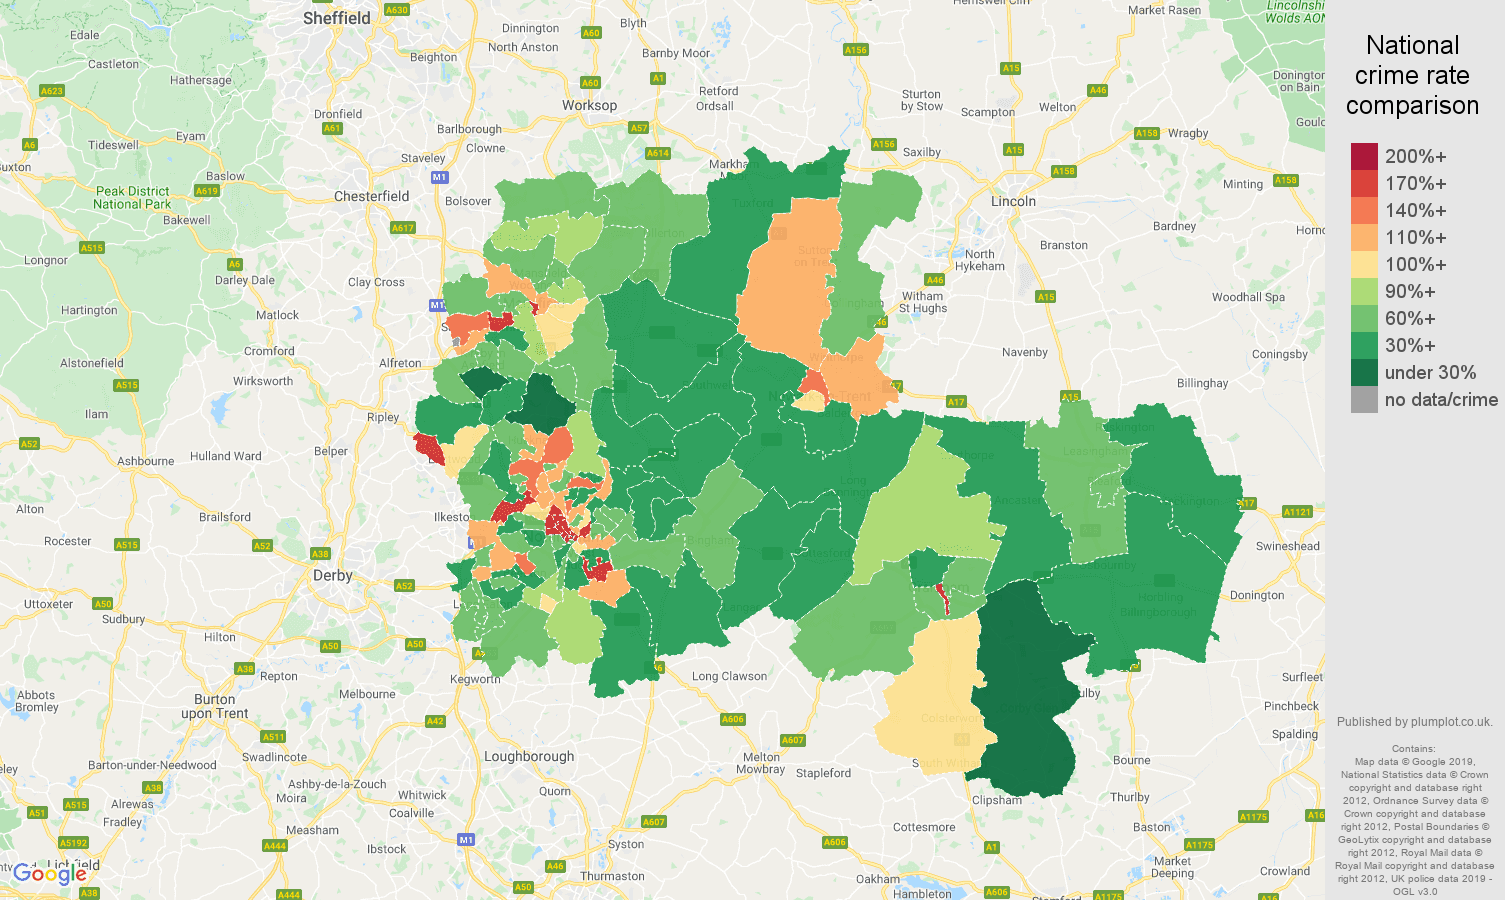 Nottingham other theft crime rate comparison map